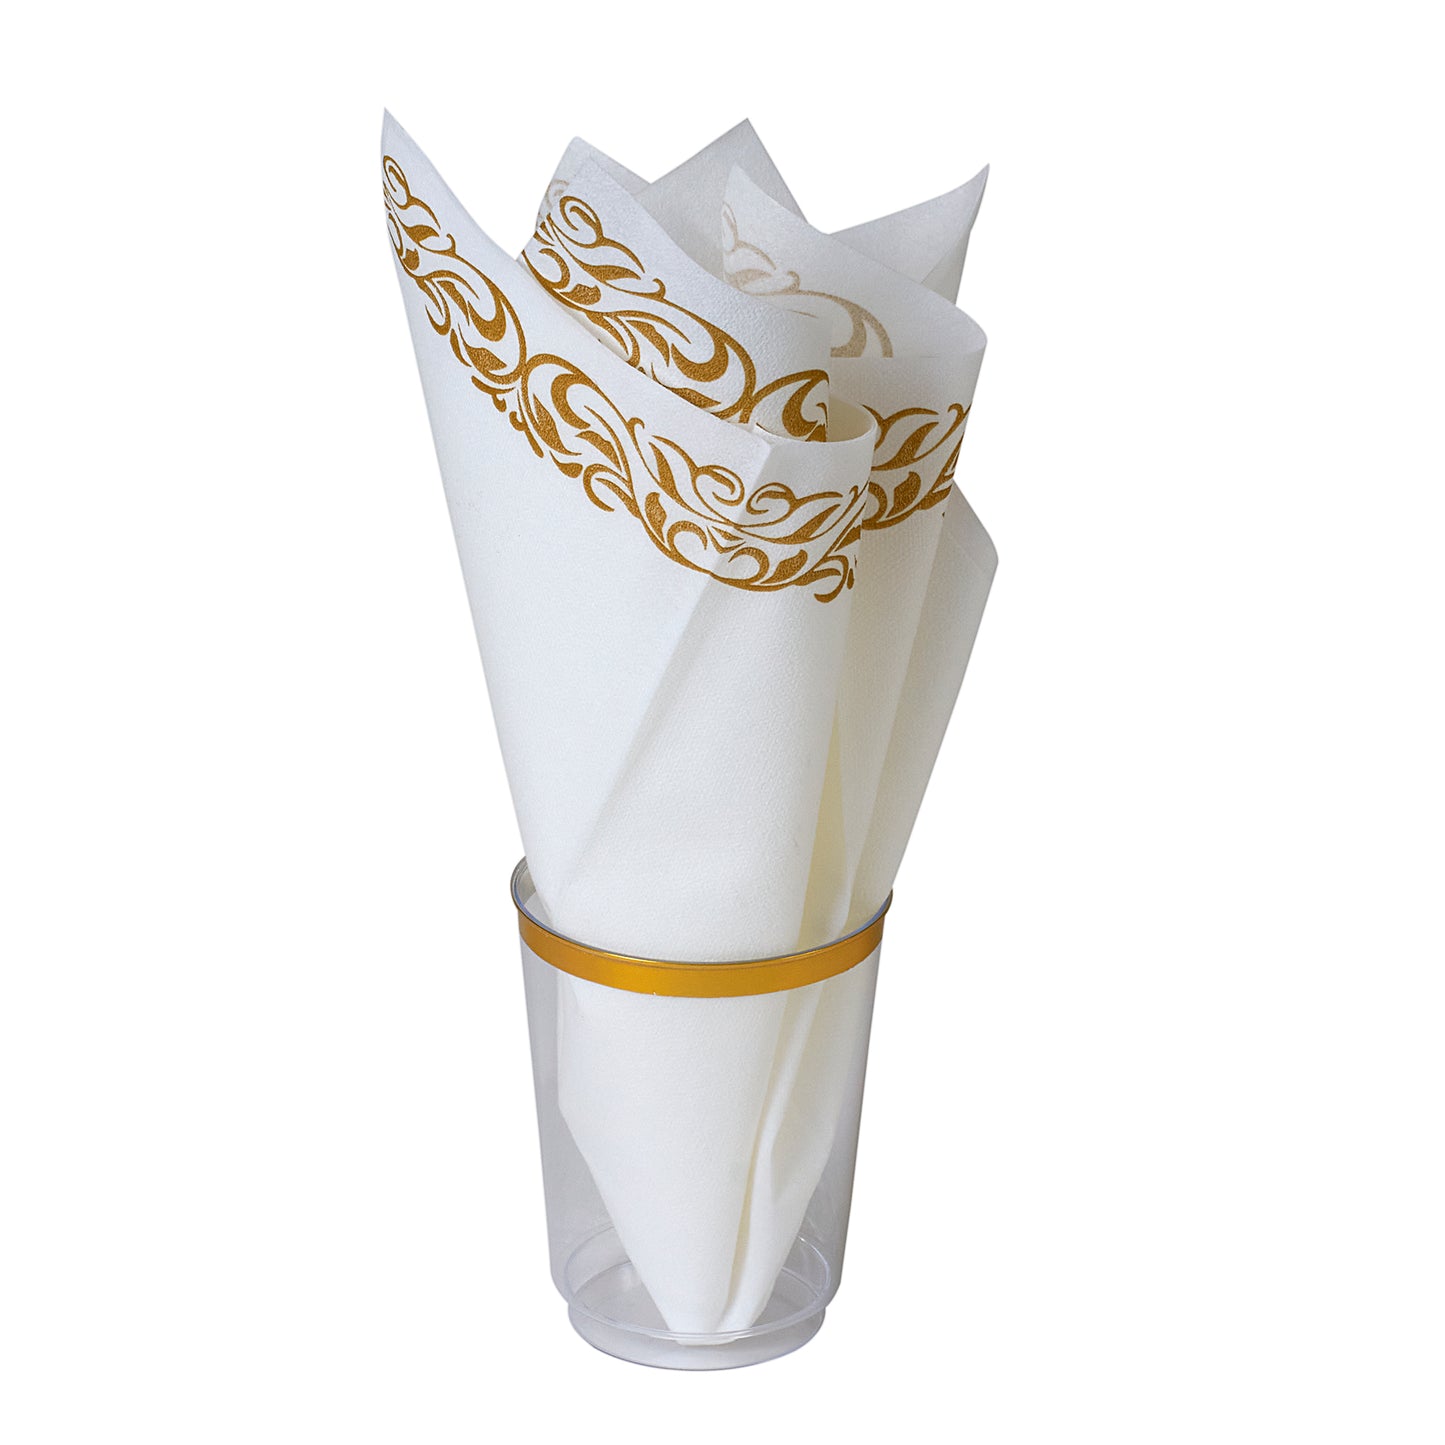 50 Gold Border disposable dinner napkins and 50  gold rim disposable plastic 10 oz. cups